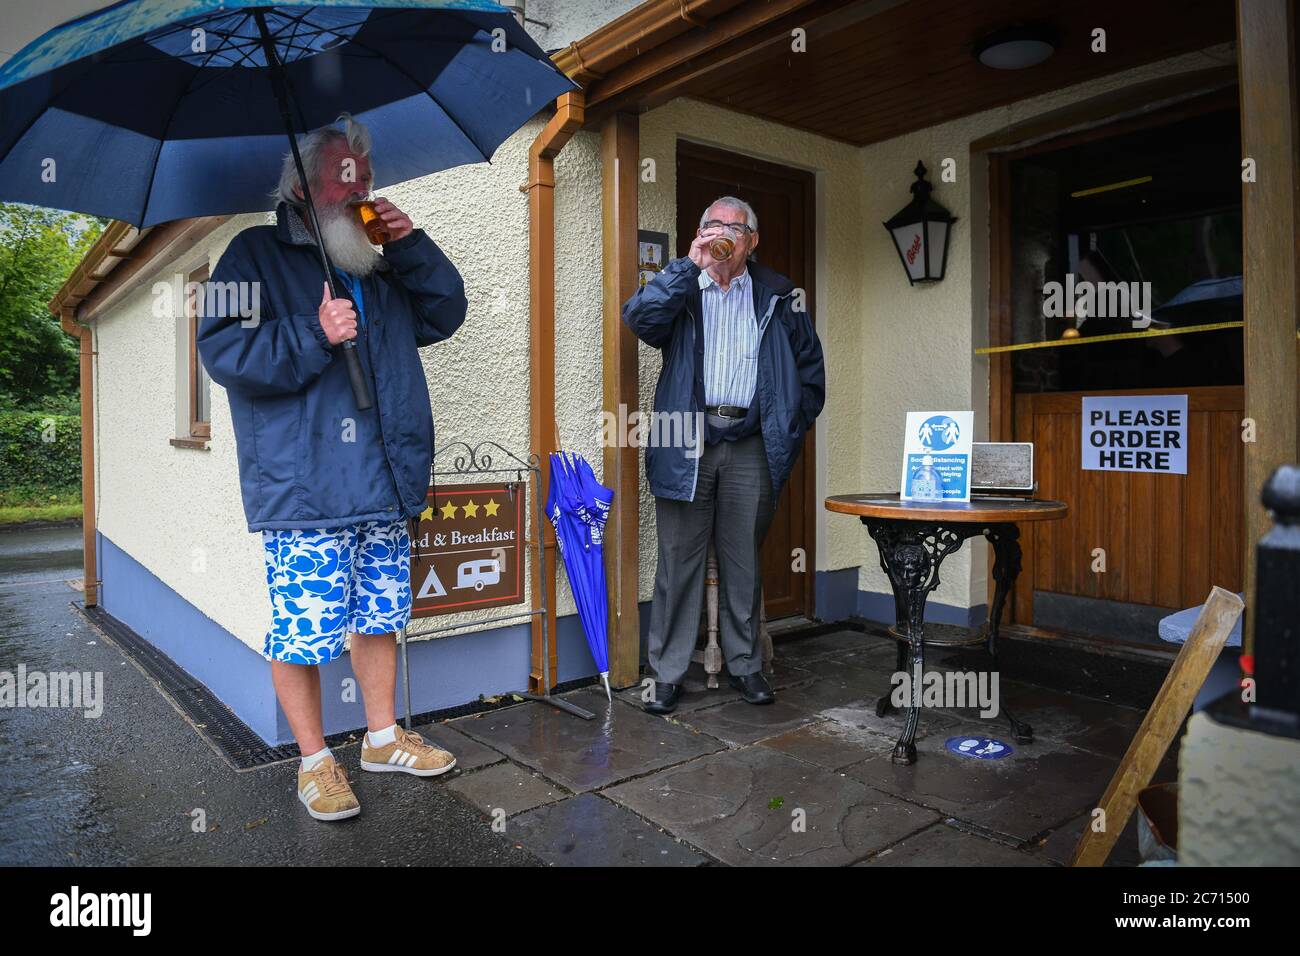 Brecon Beacons, Wales, UK. 13th July 2020. Locals at the Ancient Britton pub in the village of Abercrave in the Brecon Beacons, enjoying their first drinks in weeks, as bars open for outdoor service across Wales for the first time since lockdown closure. Credit : Robert Melen/Alamy Live News Stock Photo